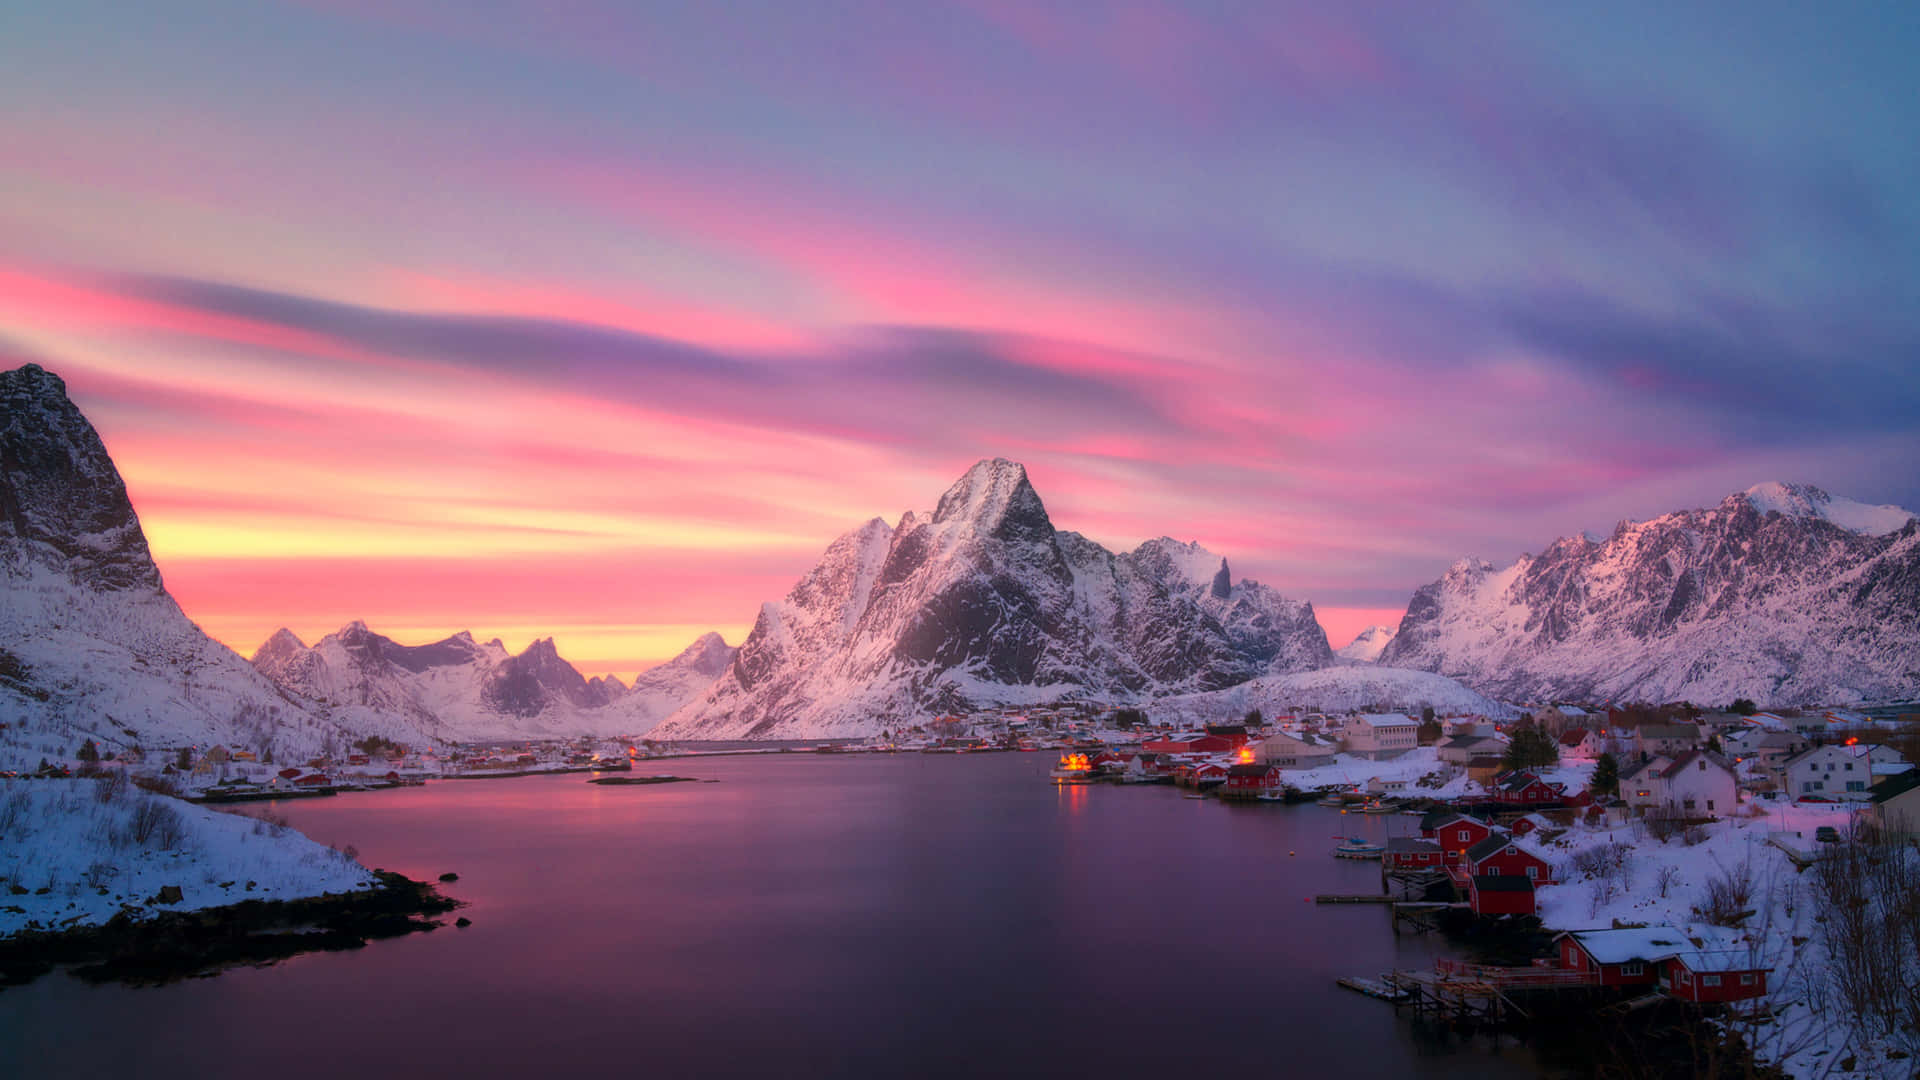 A Colorful Sunset Over A Snowy Mountain Range